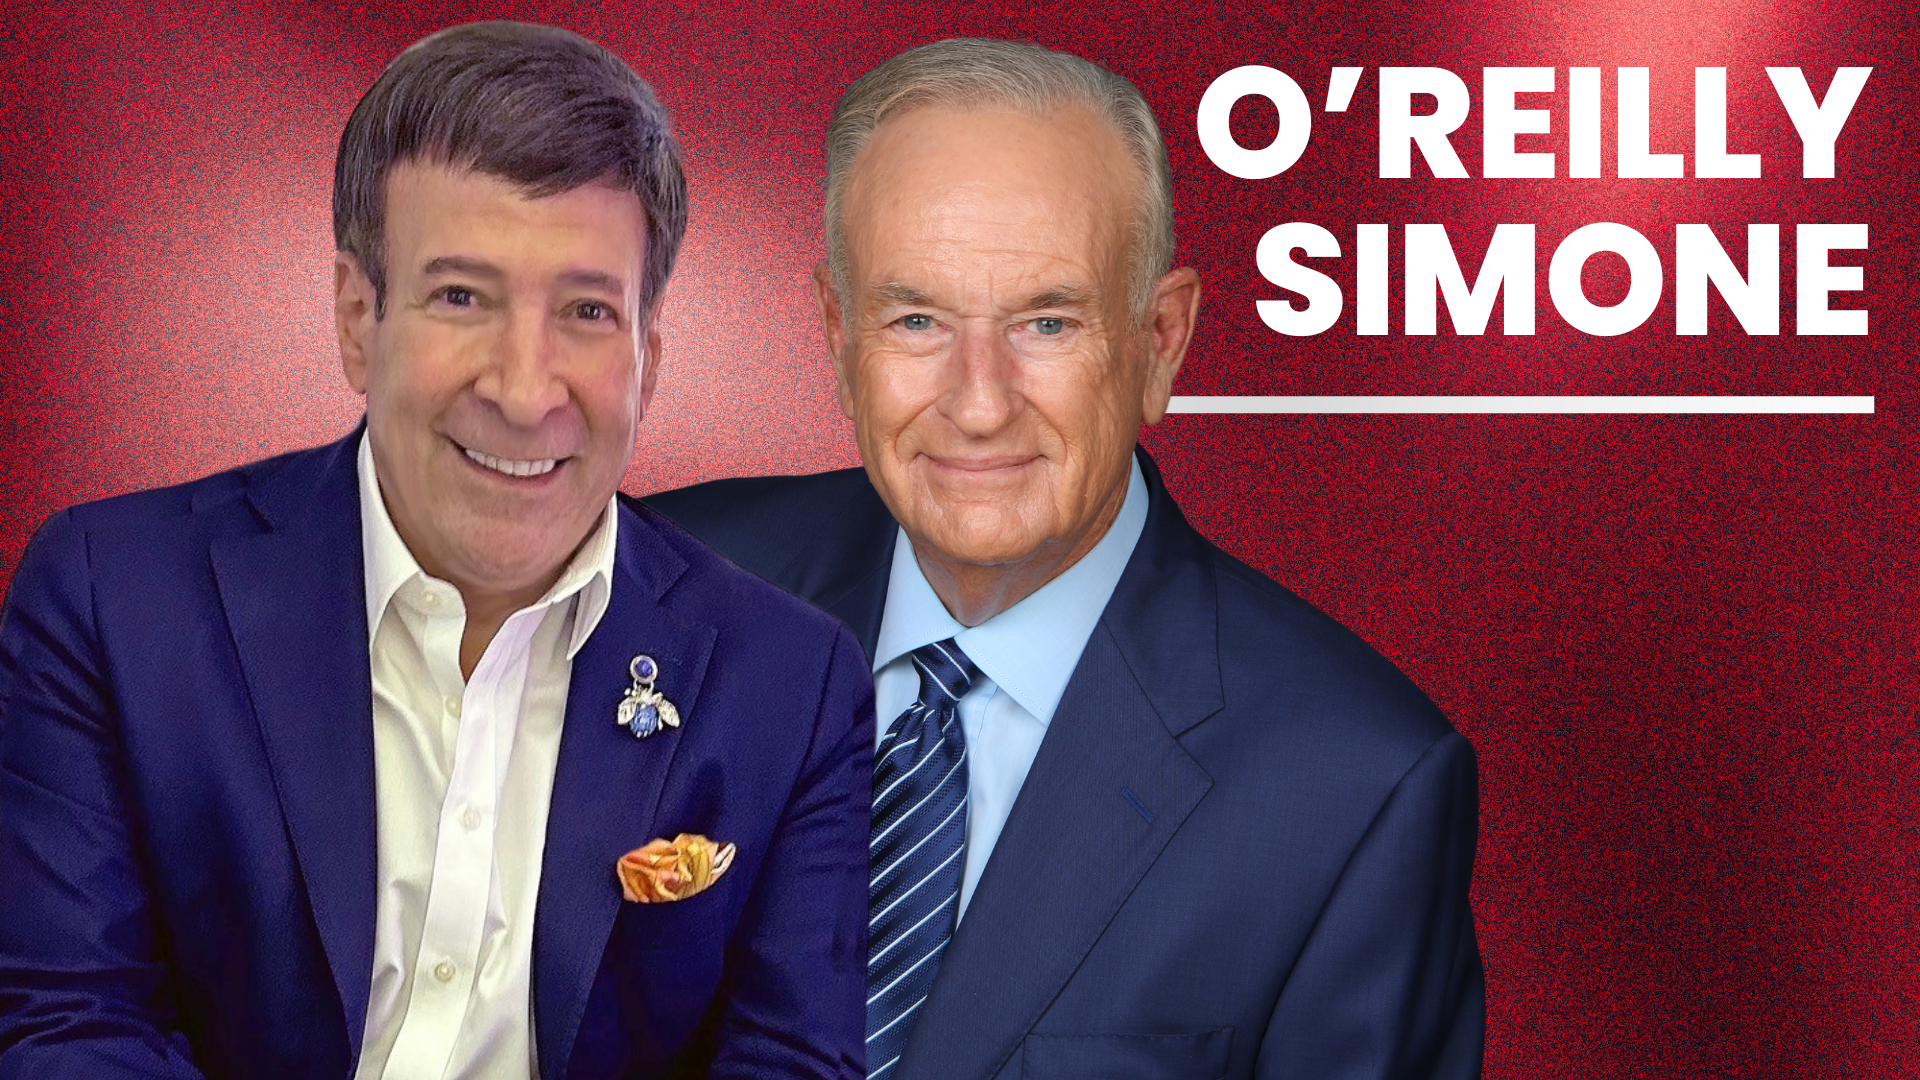 O'Reilly and Simone on the Trump Trial's Controversial Judge